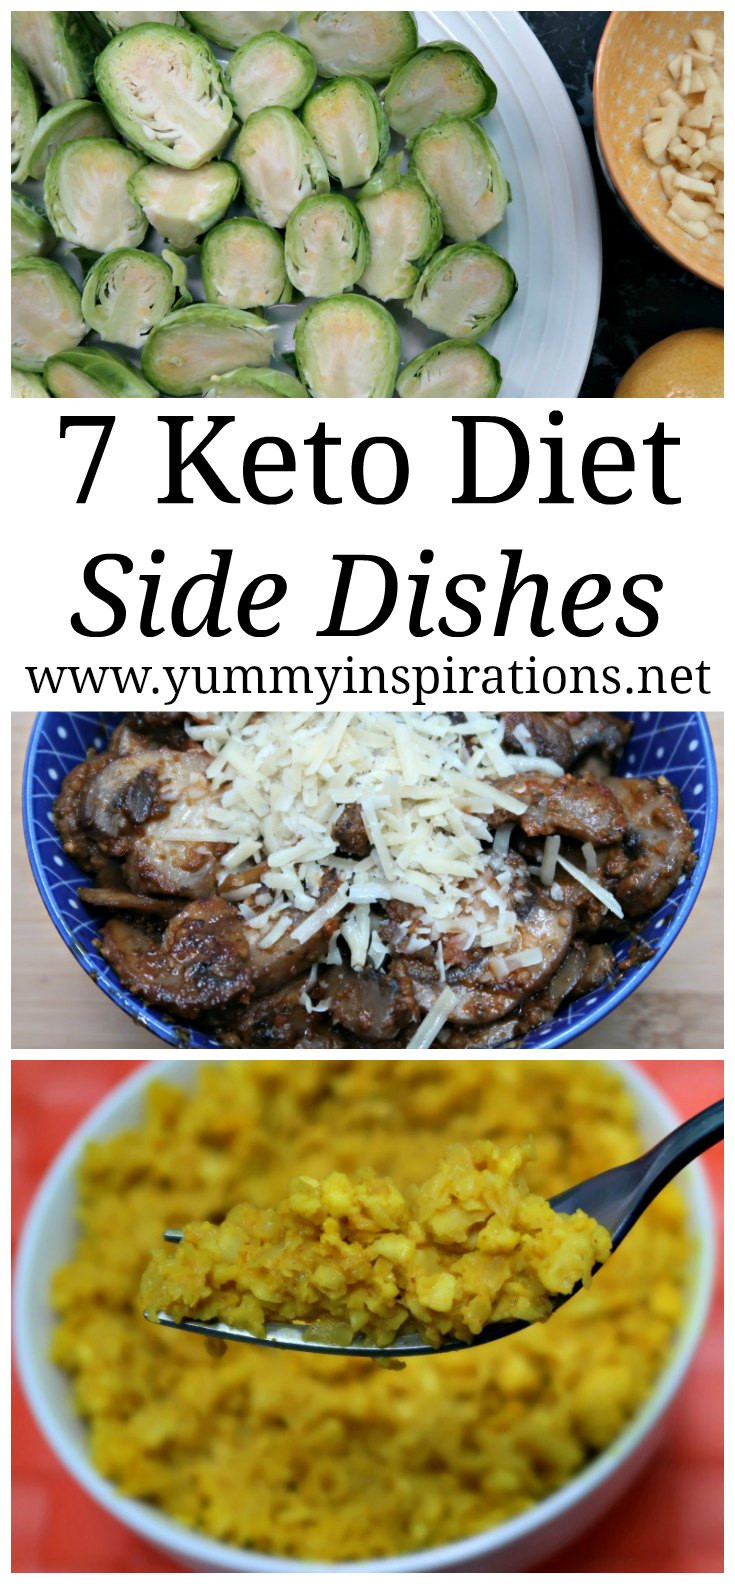 Low Carb Keto Sides
 7 Keto Side Dishes Easy Low Carb Sides LCHF Recipes